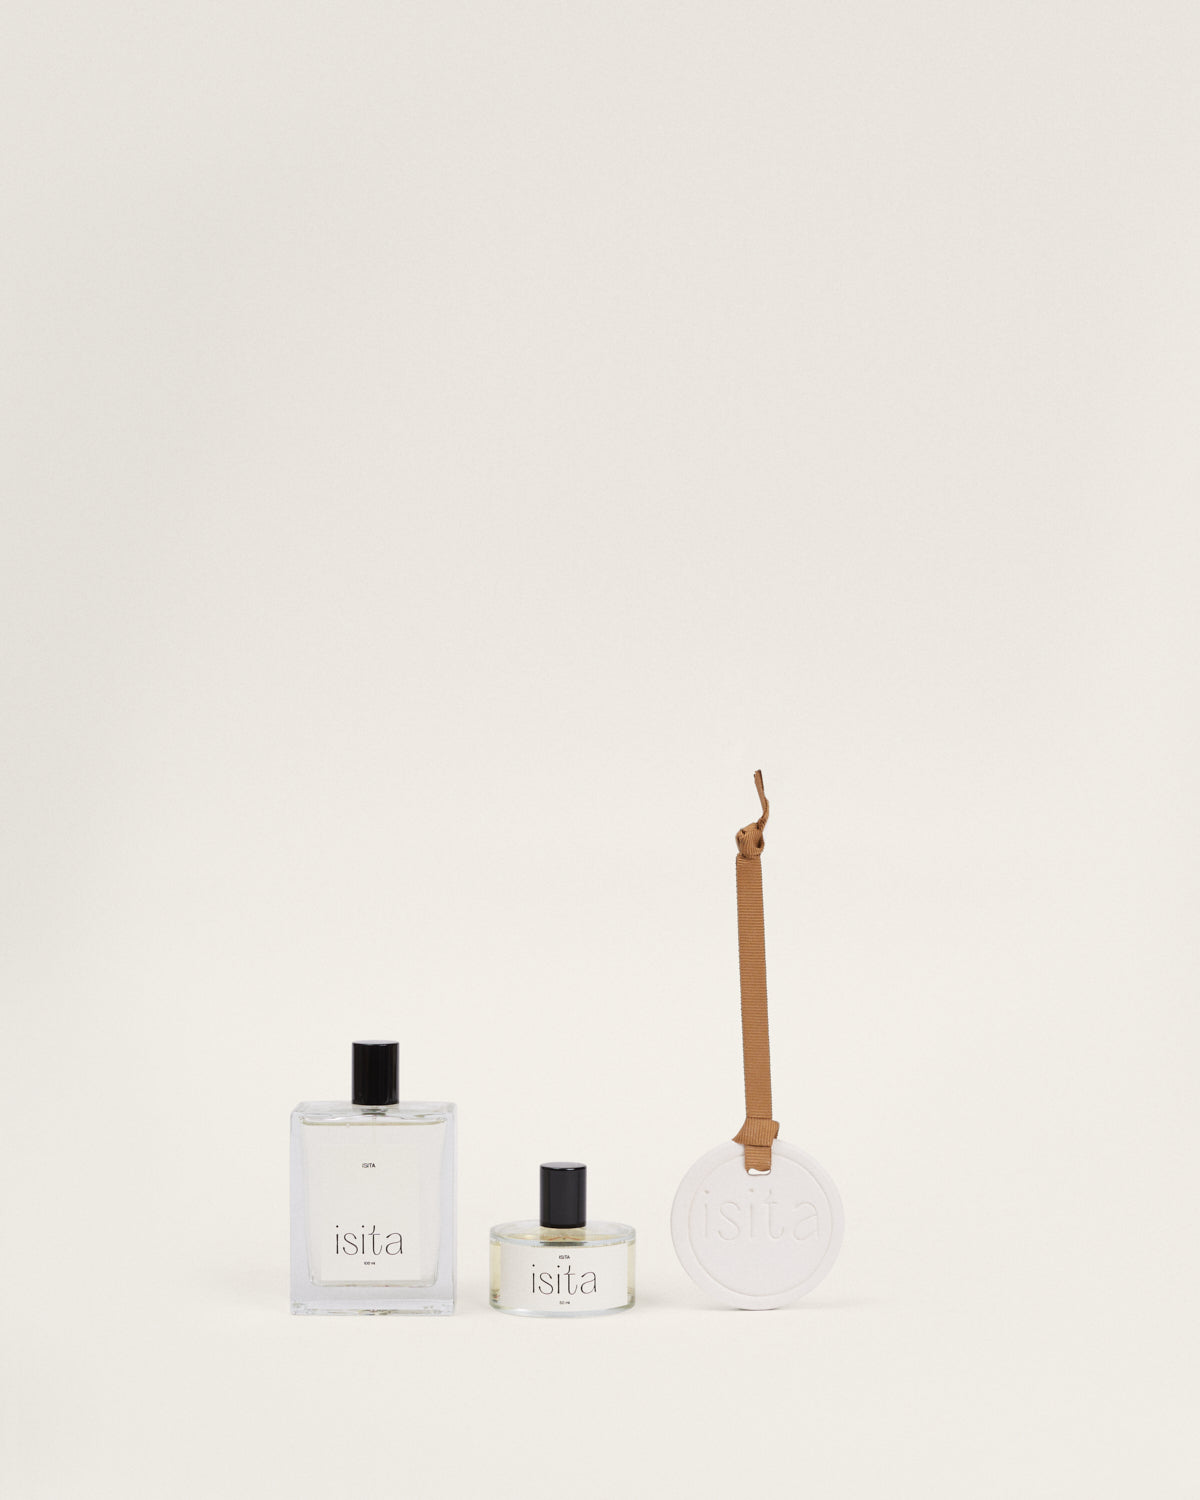 Pack of isita's home spray and diffuser